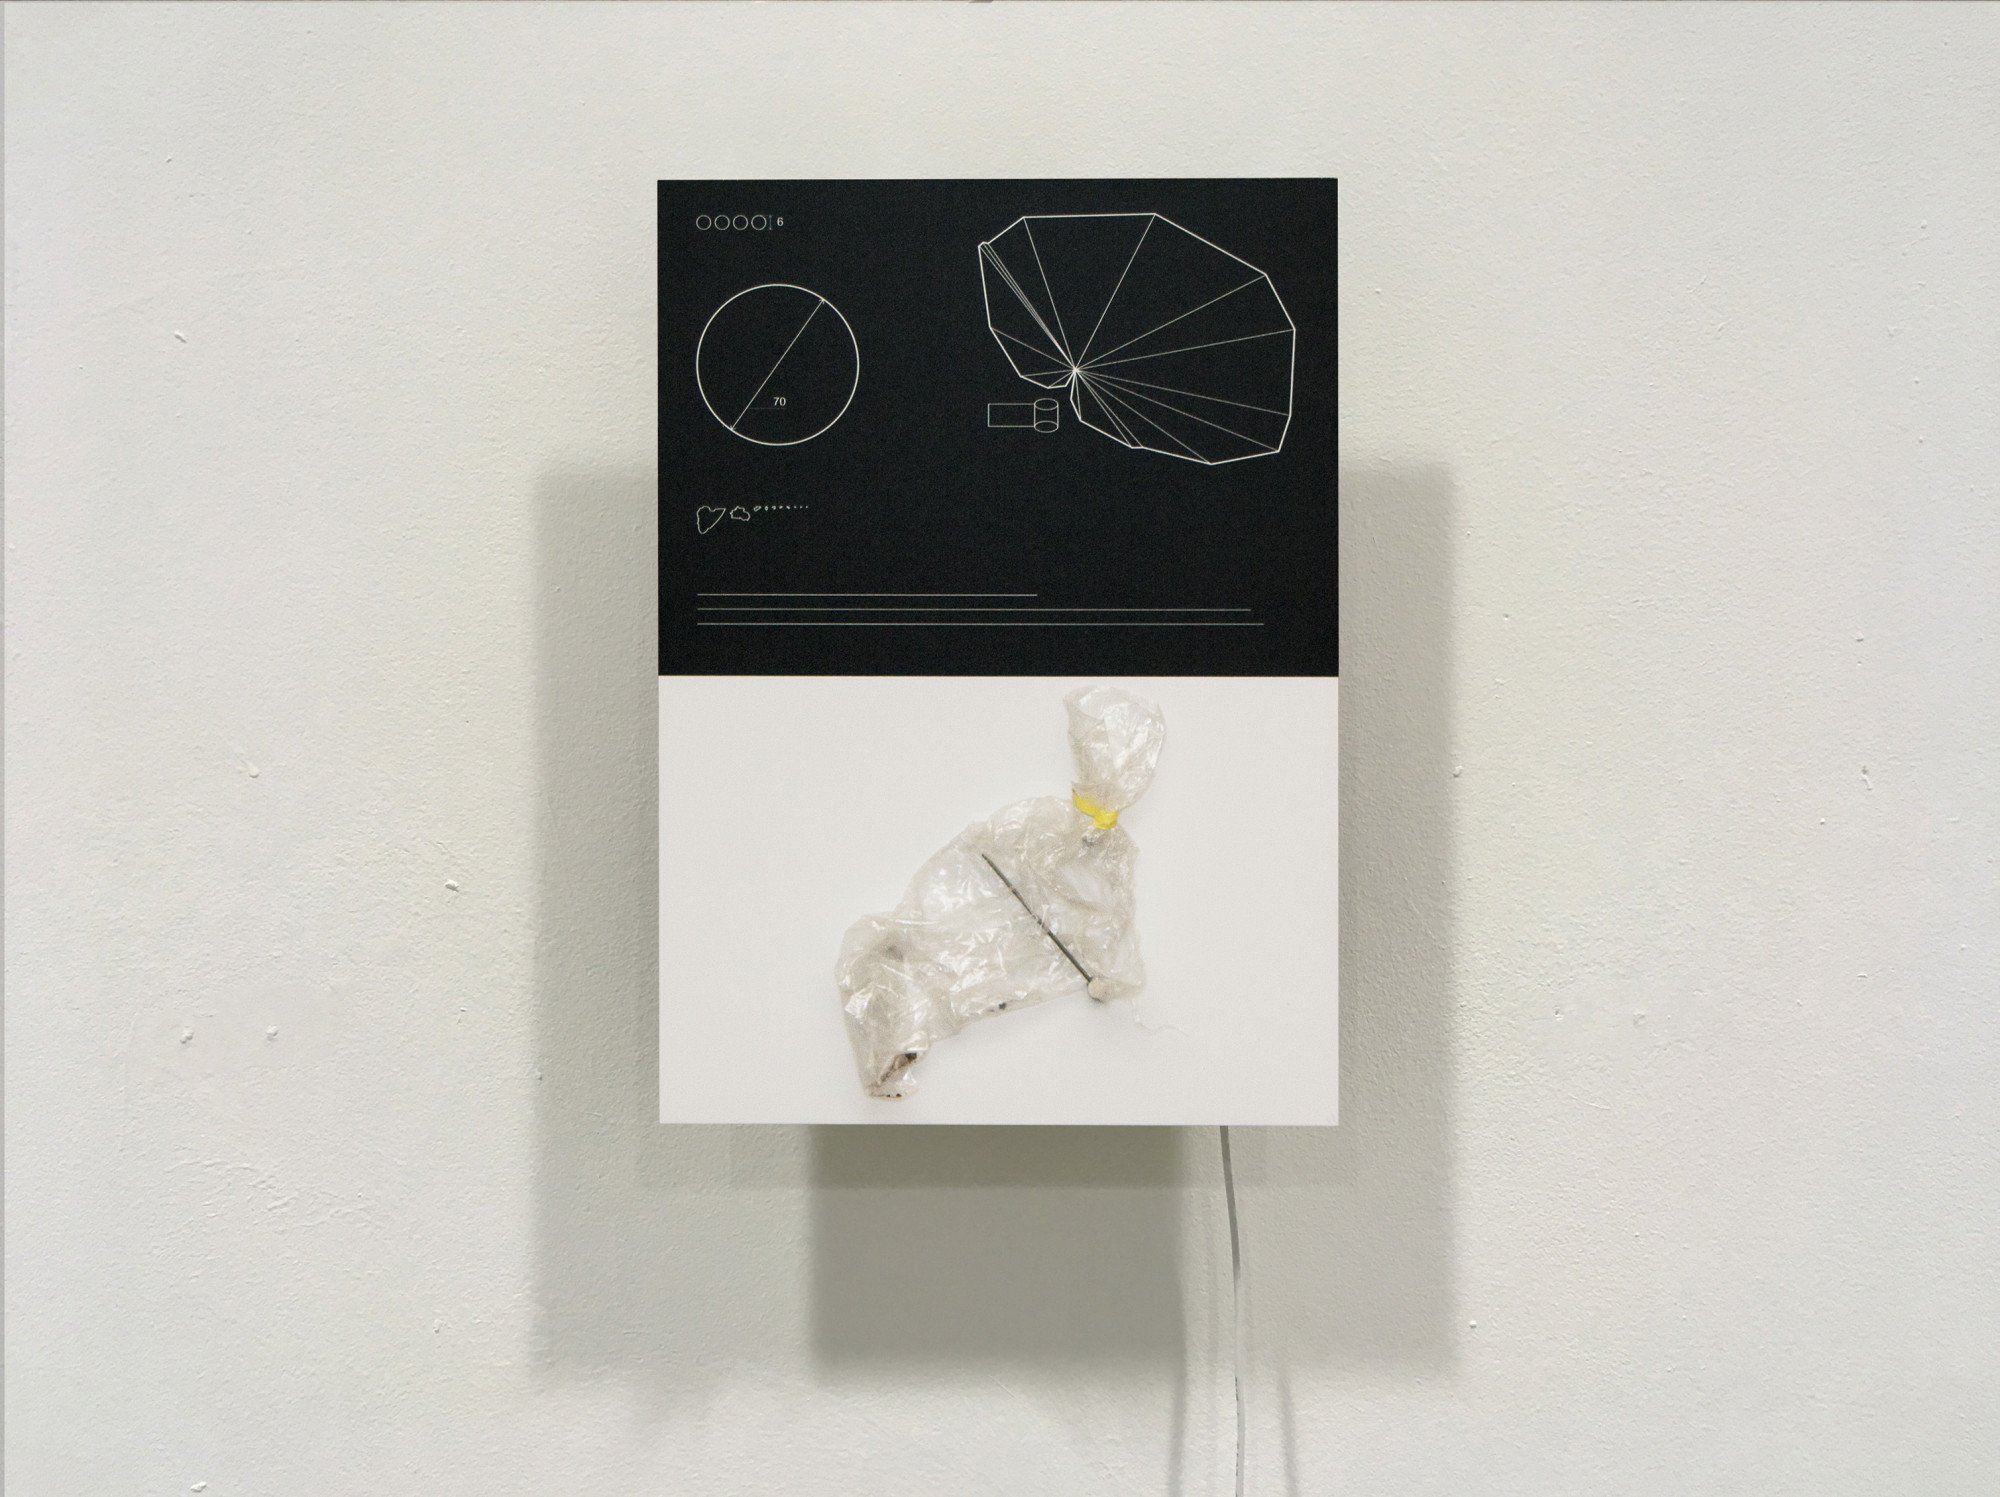 Plastic Bag, 2019. From The Order of Things project. Martynenko documents discarded objects, extracting all the available information from them and evaluating it against the objects themselves